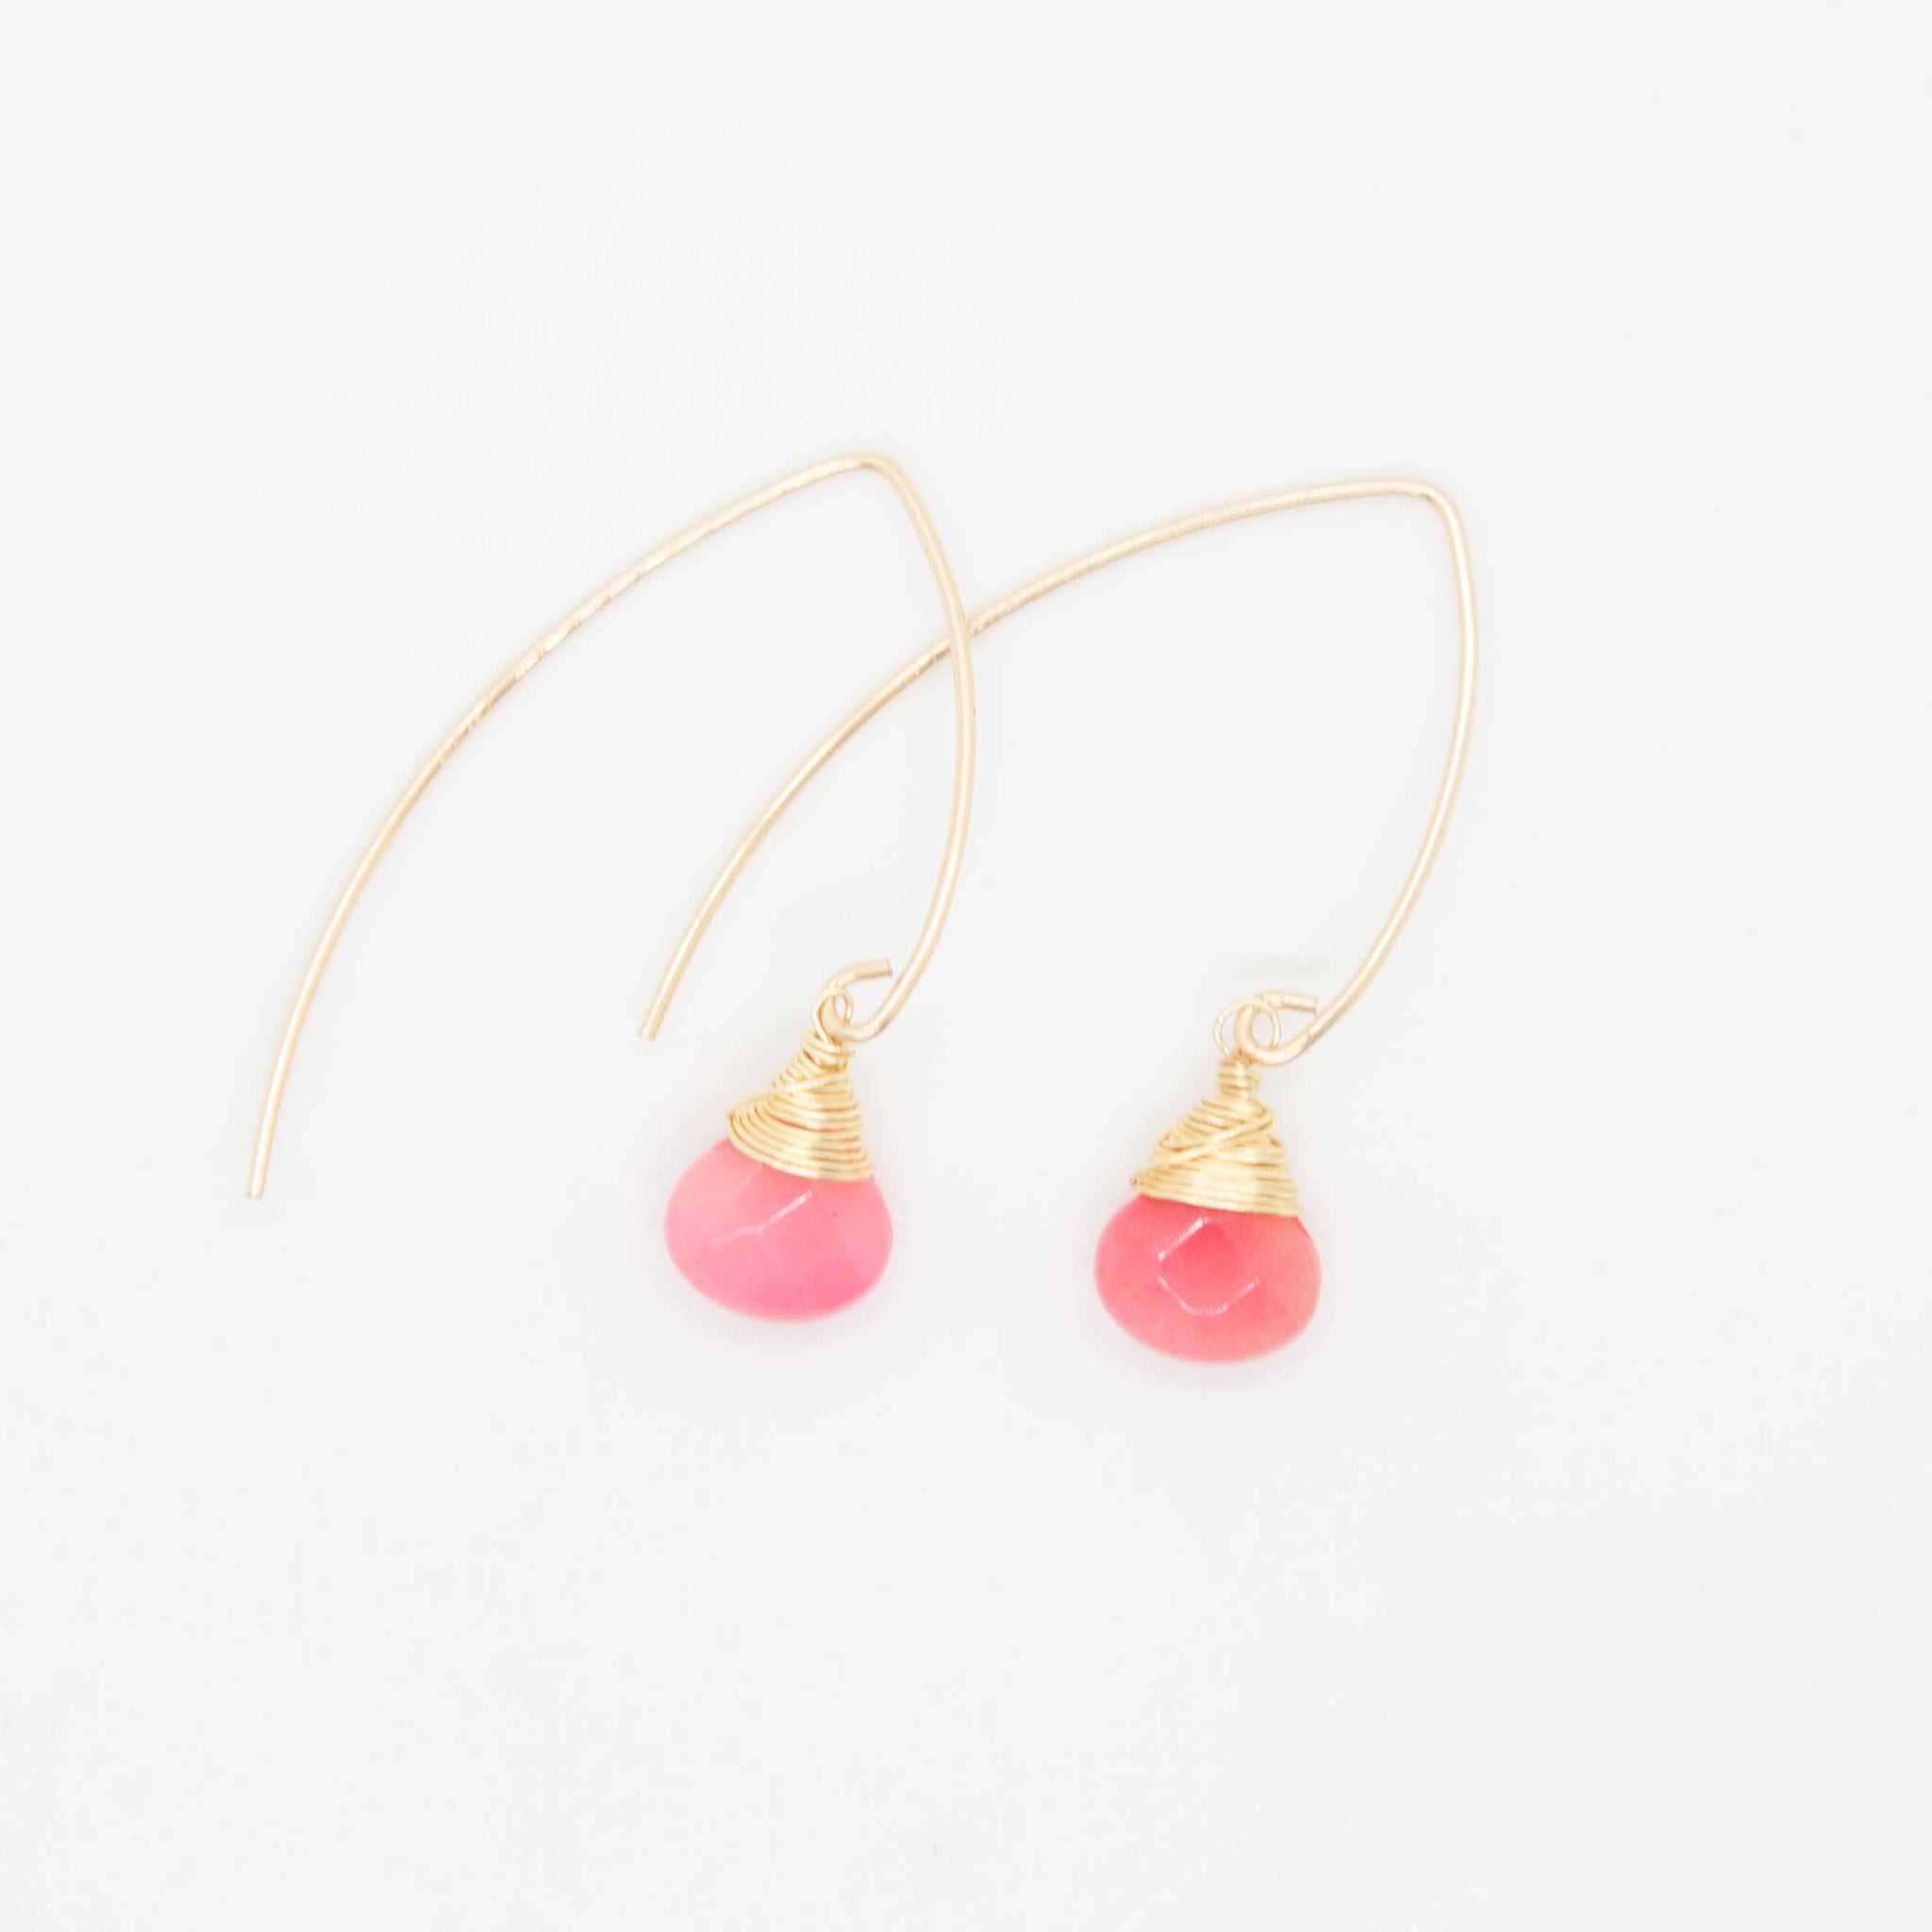 Decorate your pretty lobes this summer with these delicate jade drops wrapped in gold. 1 inch earrings made with faceted, pear-shaped pink jade briolettes, wrapped in 14 karat gold wire on gold-filled earring hooks. Hypo-allergenic and sensitive ear friendly. Handmade in Toronto by kp jewelry co.